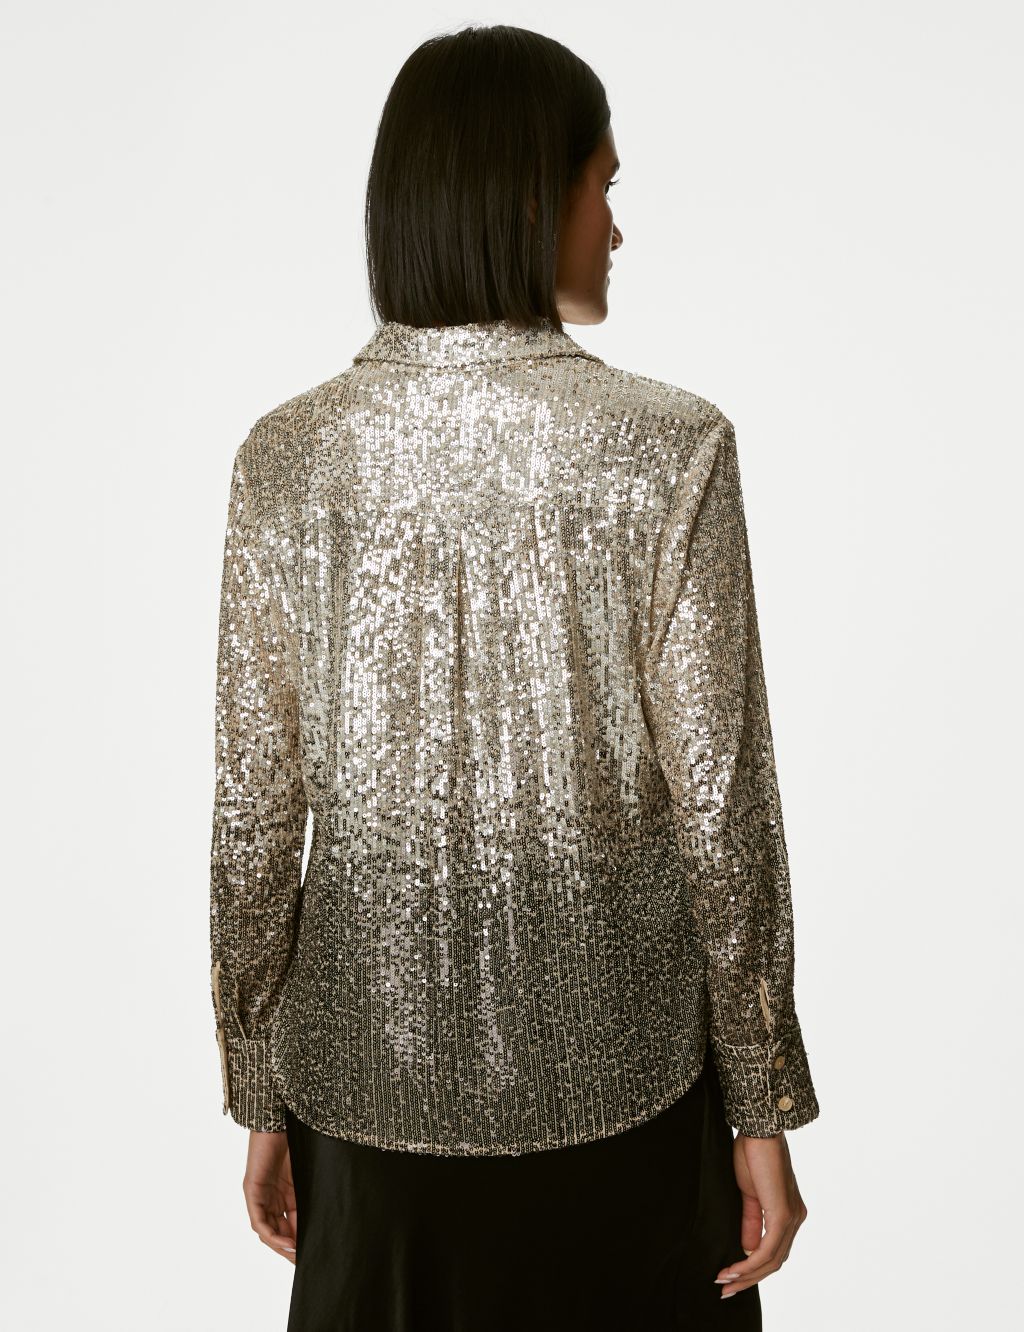 Sequin Collared Shirt image 6